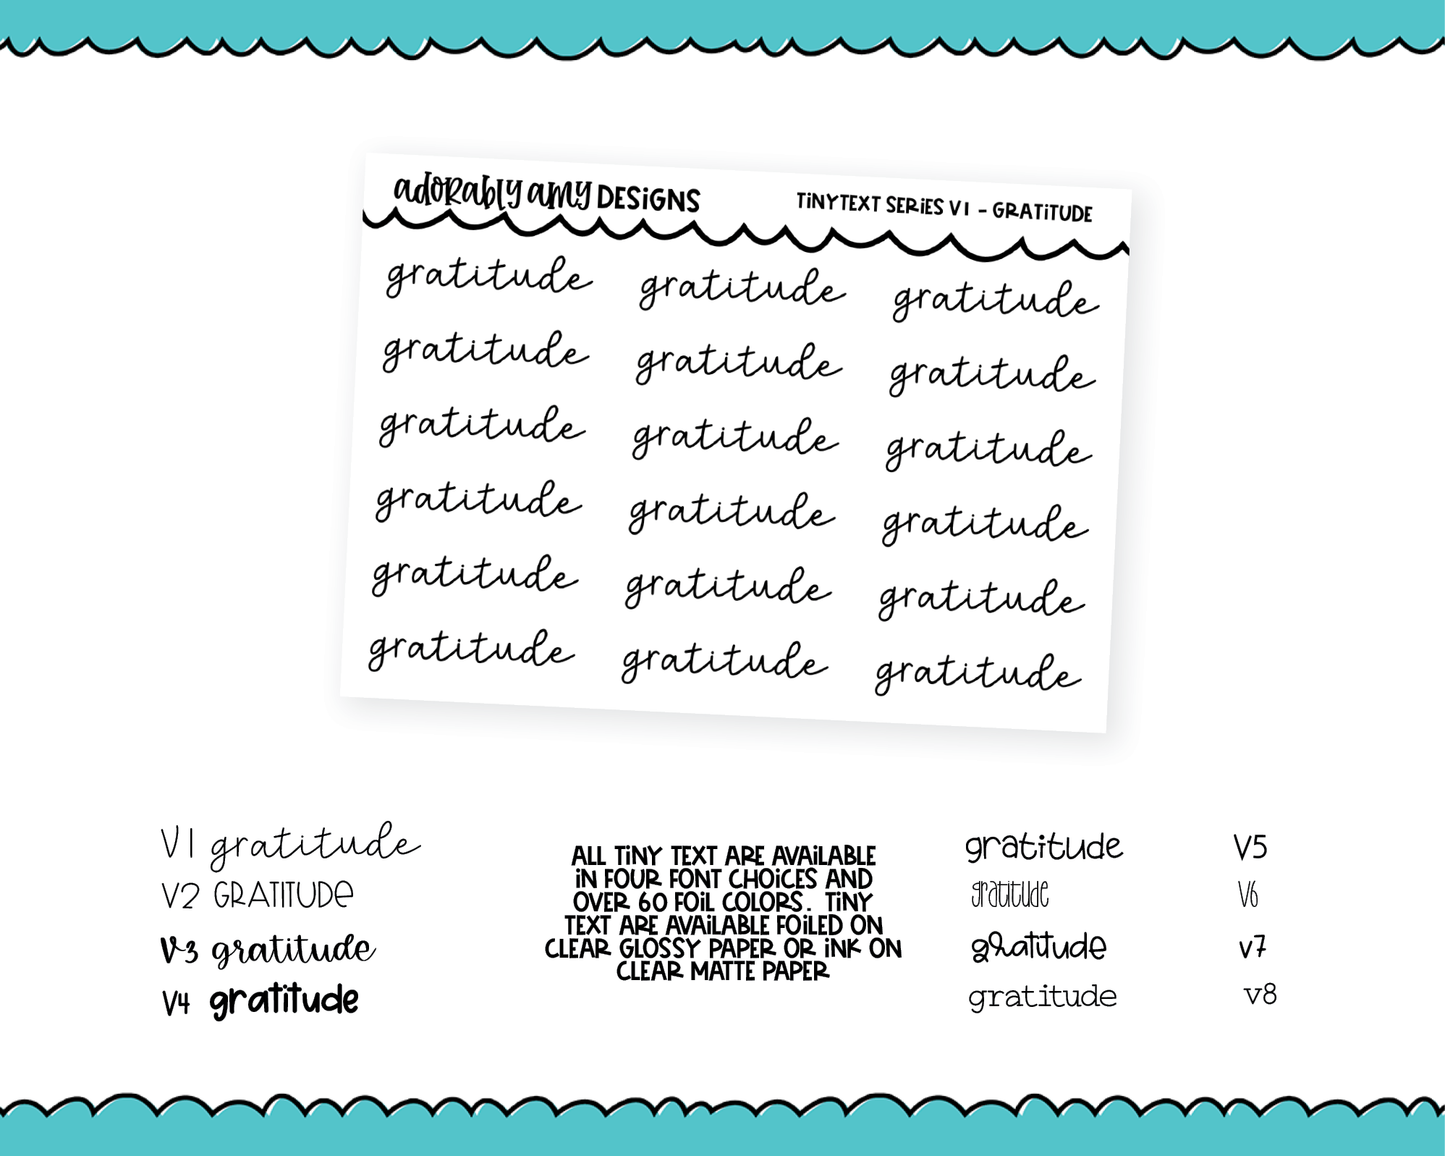 Foiled Tiny Text Series - Gratitude Checklist Size Planner Stickers for any Planner or Insert